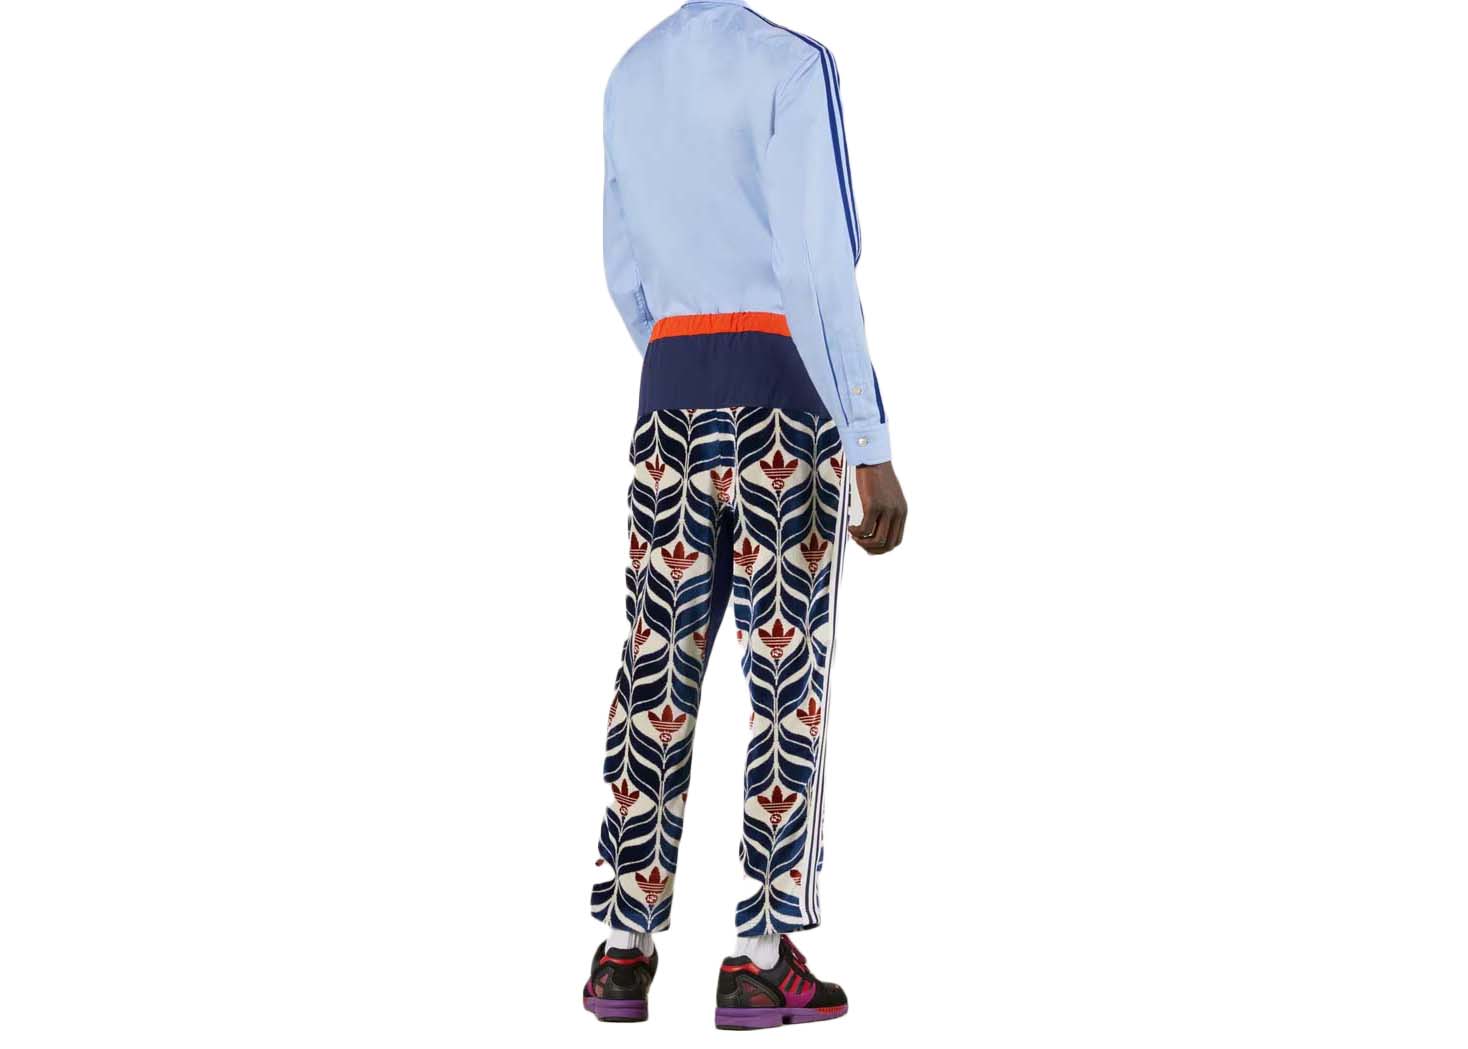 Gucci x adidas Interlocking G And Trefoil Pant Ivory/Blue/Red